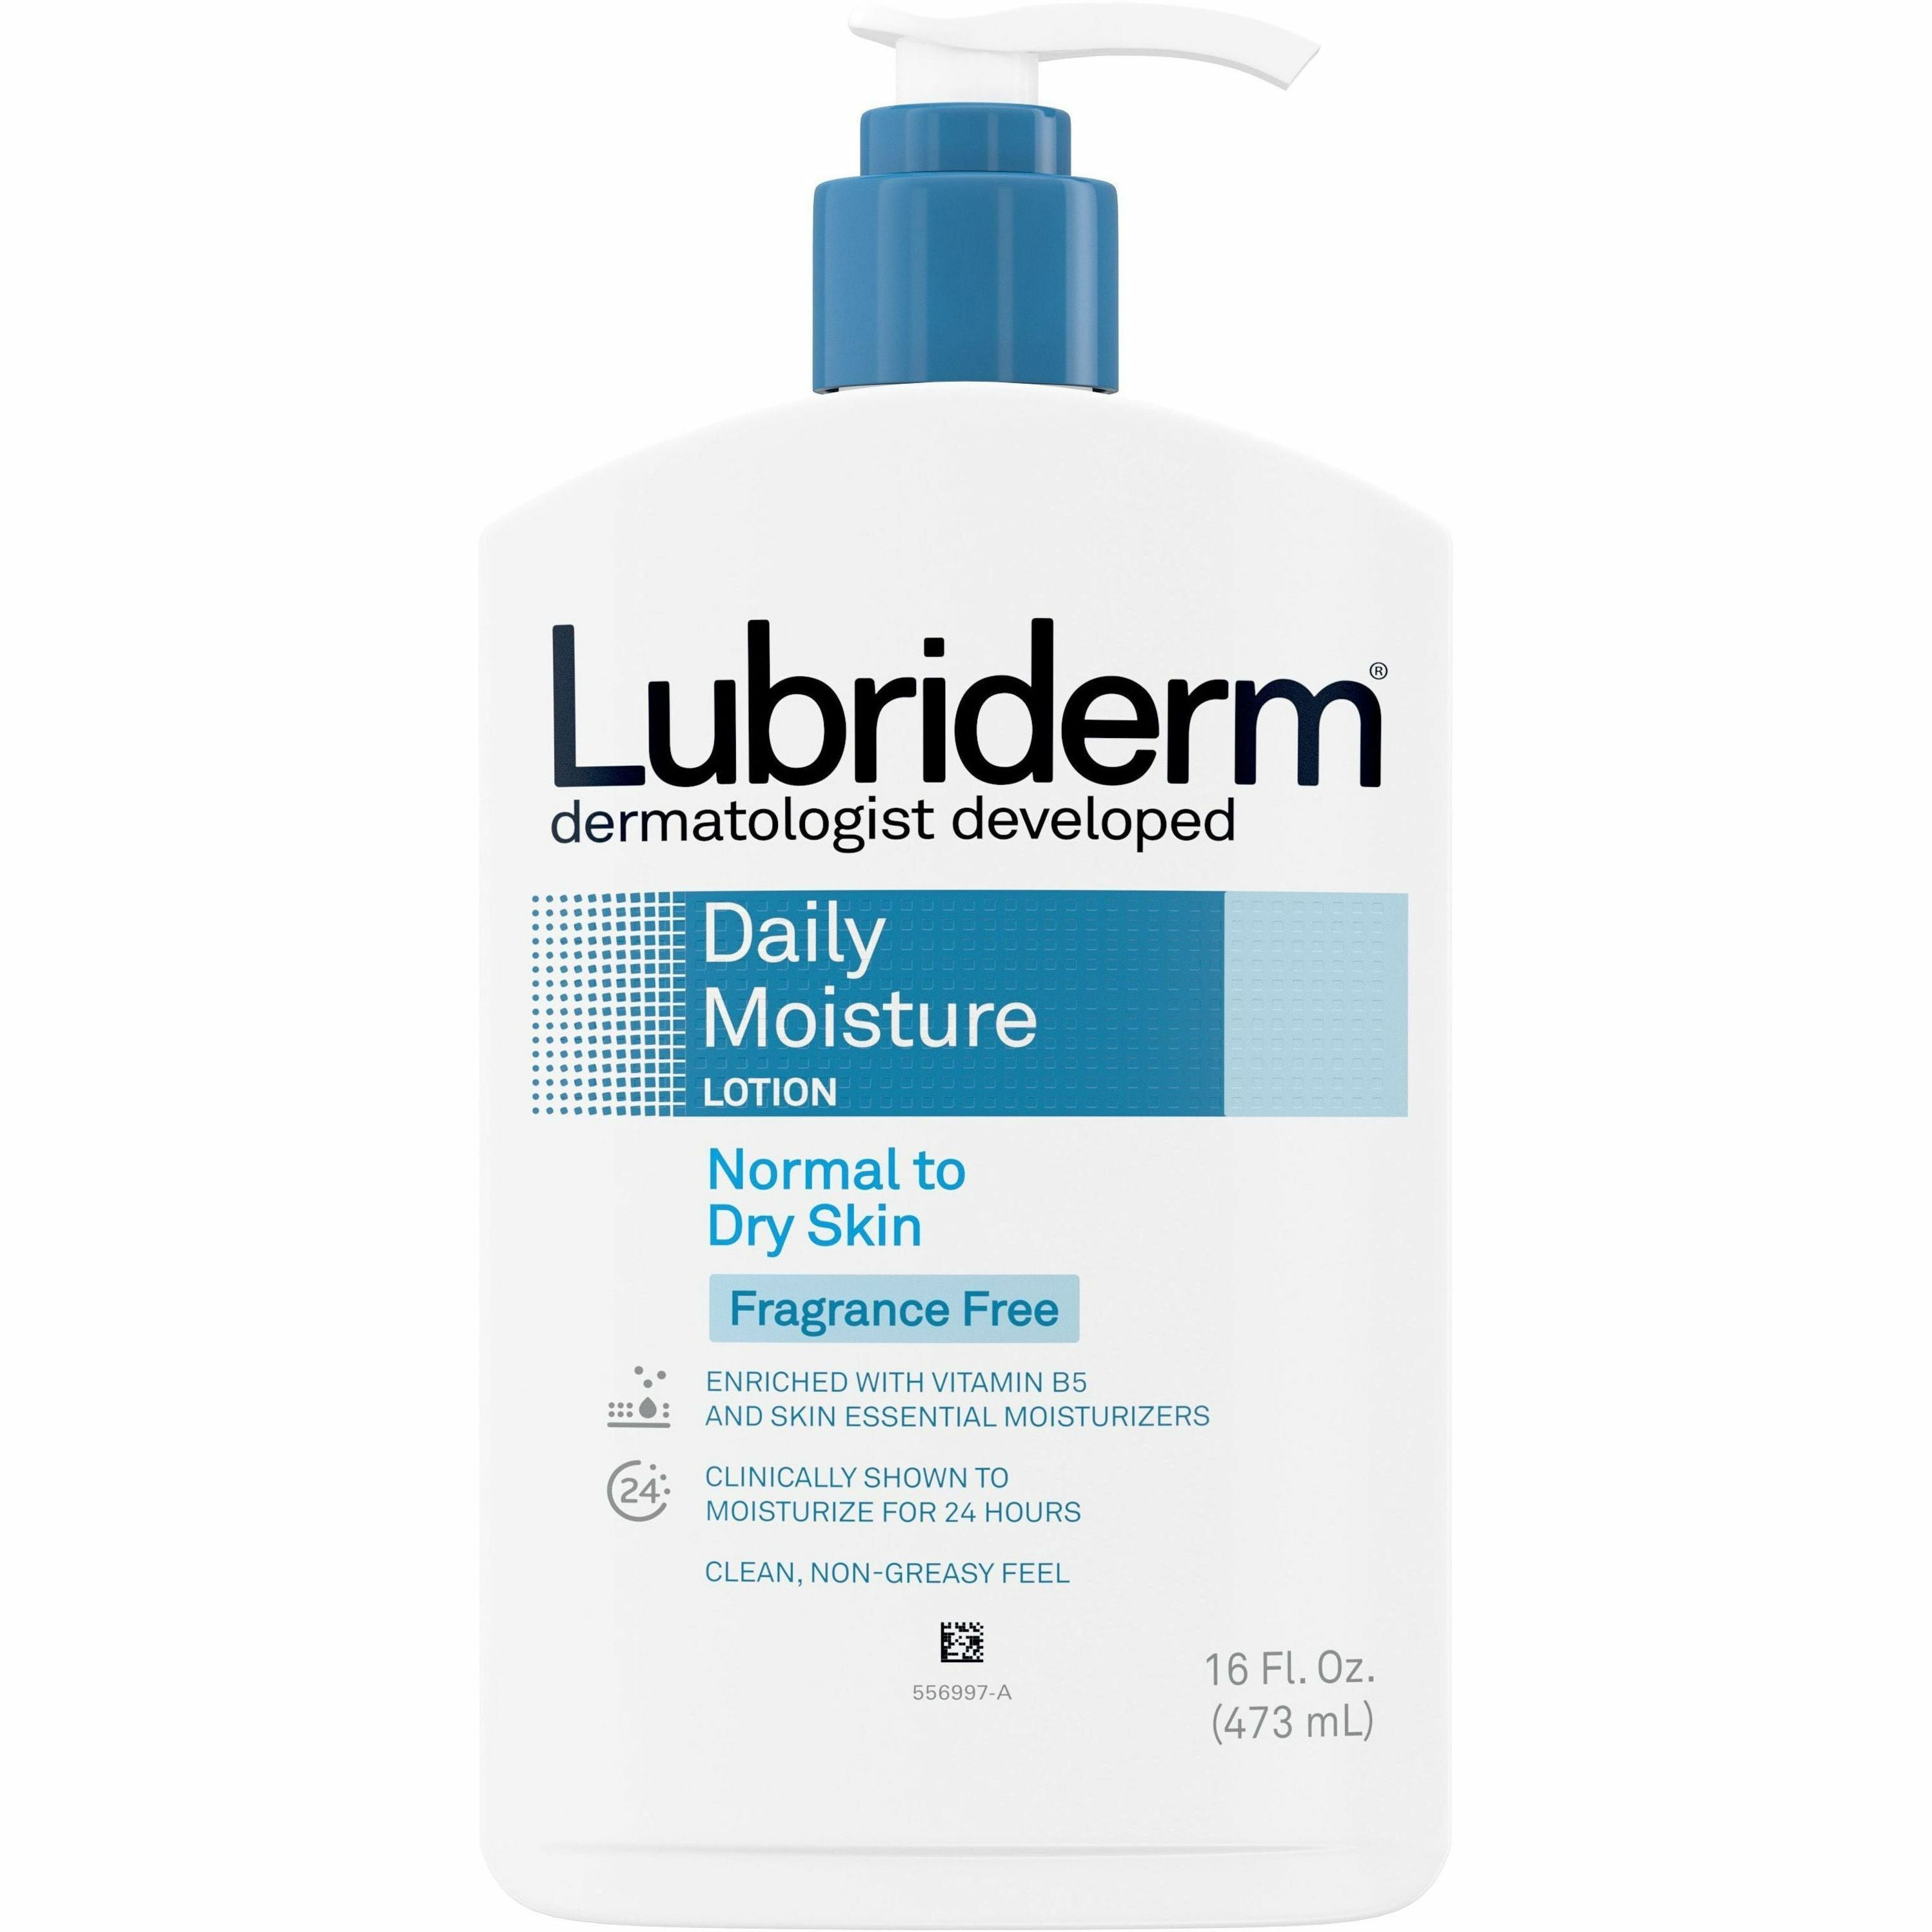 lubriderm-daily-moisture-lotion-lotion-16-fl-oz-for-dry-normal-skin-applicable-on-body-moisturising-non-greasy-fragrance-free-absorbs-quickly-12-carton_joj48323ct - 2